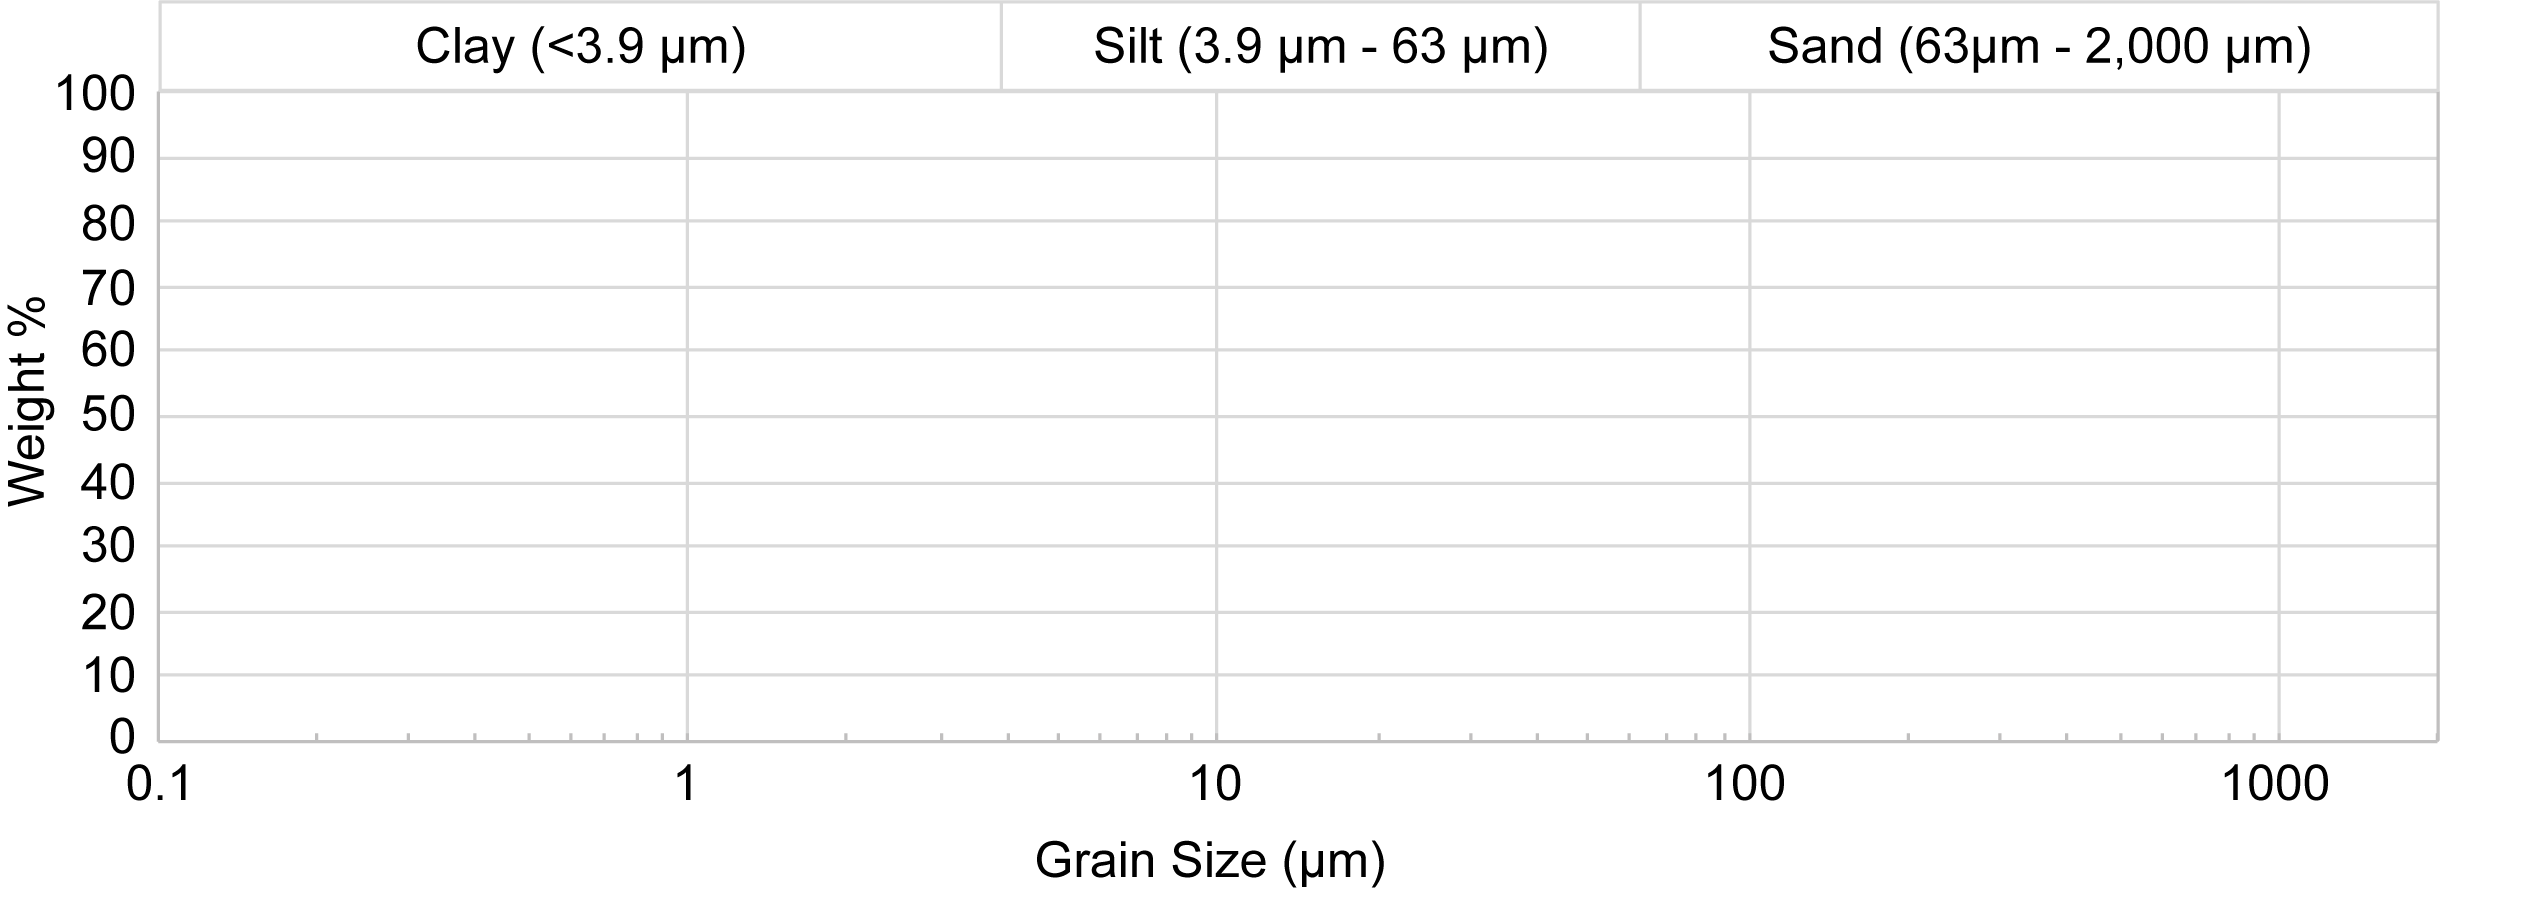 Grain size graph to use in Exercise 5.2.